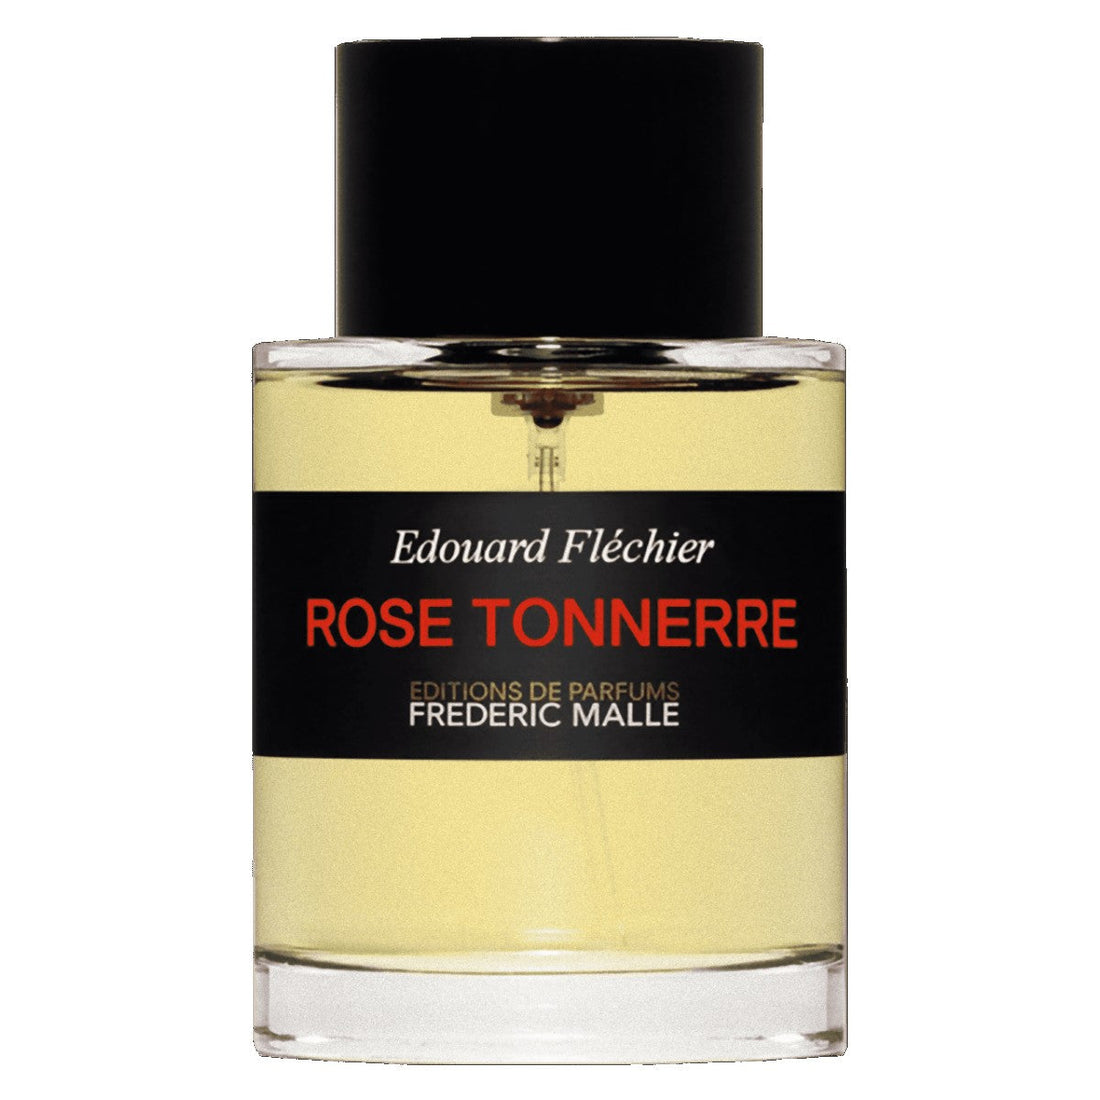 Rose Tonnerre Frederic Malle - 10 ml